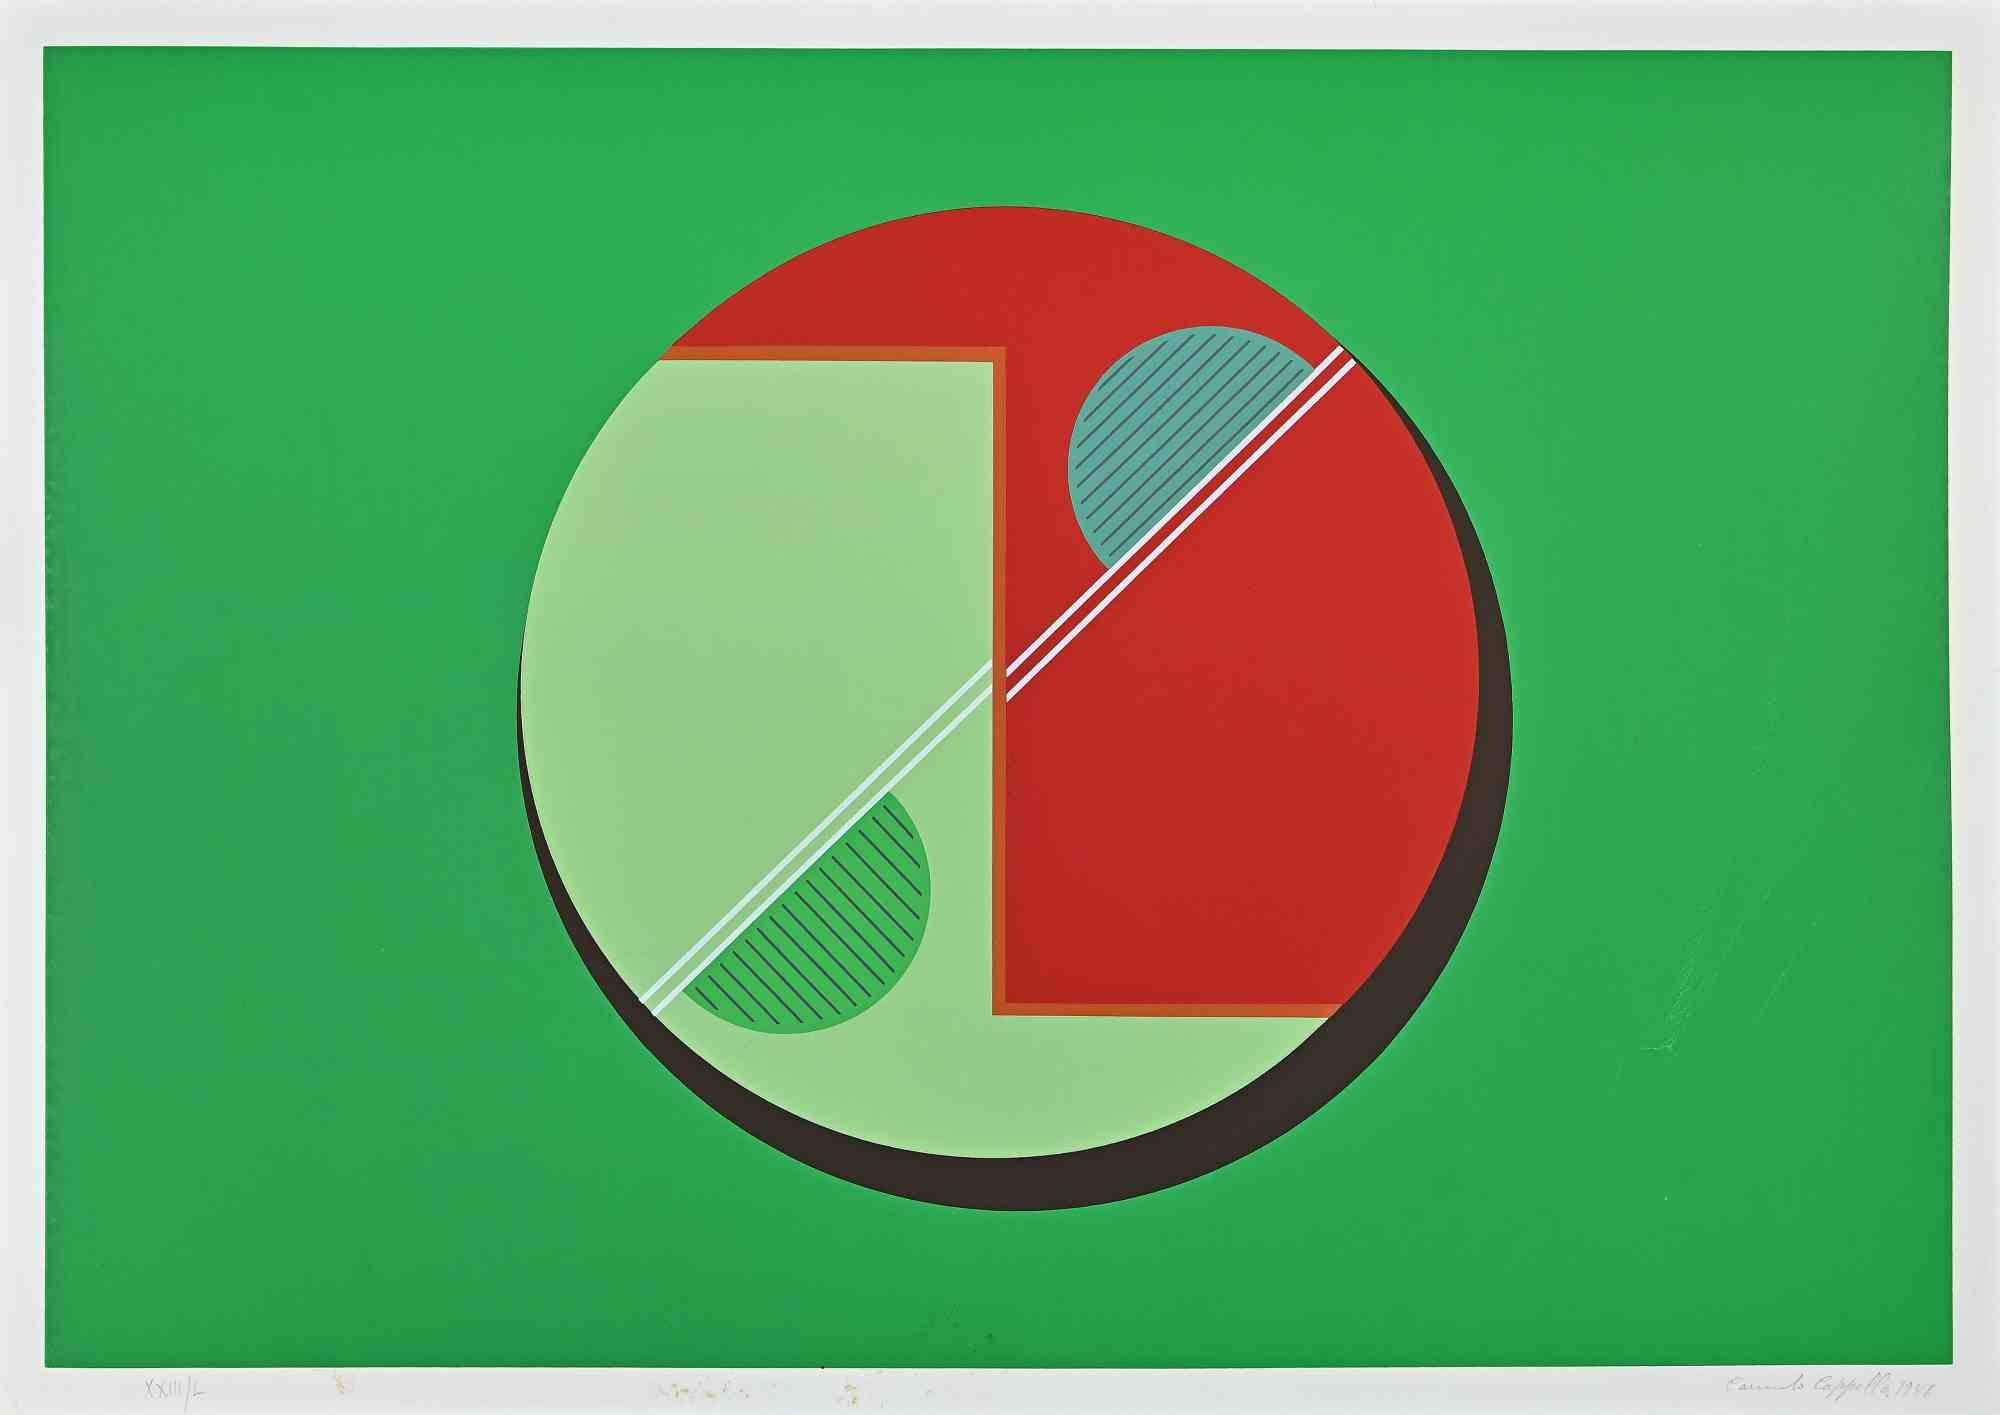 Structure N.1 is an original artwork realized by Carmelo Cappello in 1986.

Colored screen print on paper.

The print is Hand-signed and dated in pencil on the lower right. Numbered on the lower left. Edition XXIII/L

Good conditions.

On the back